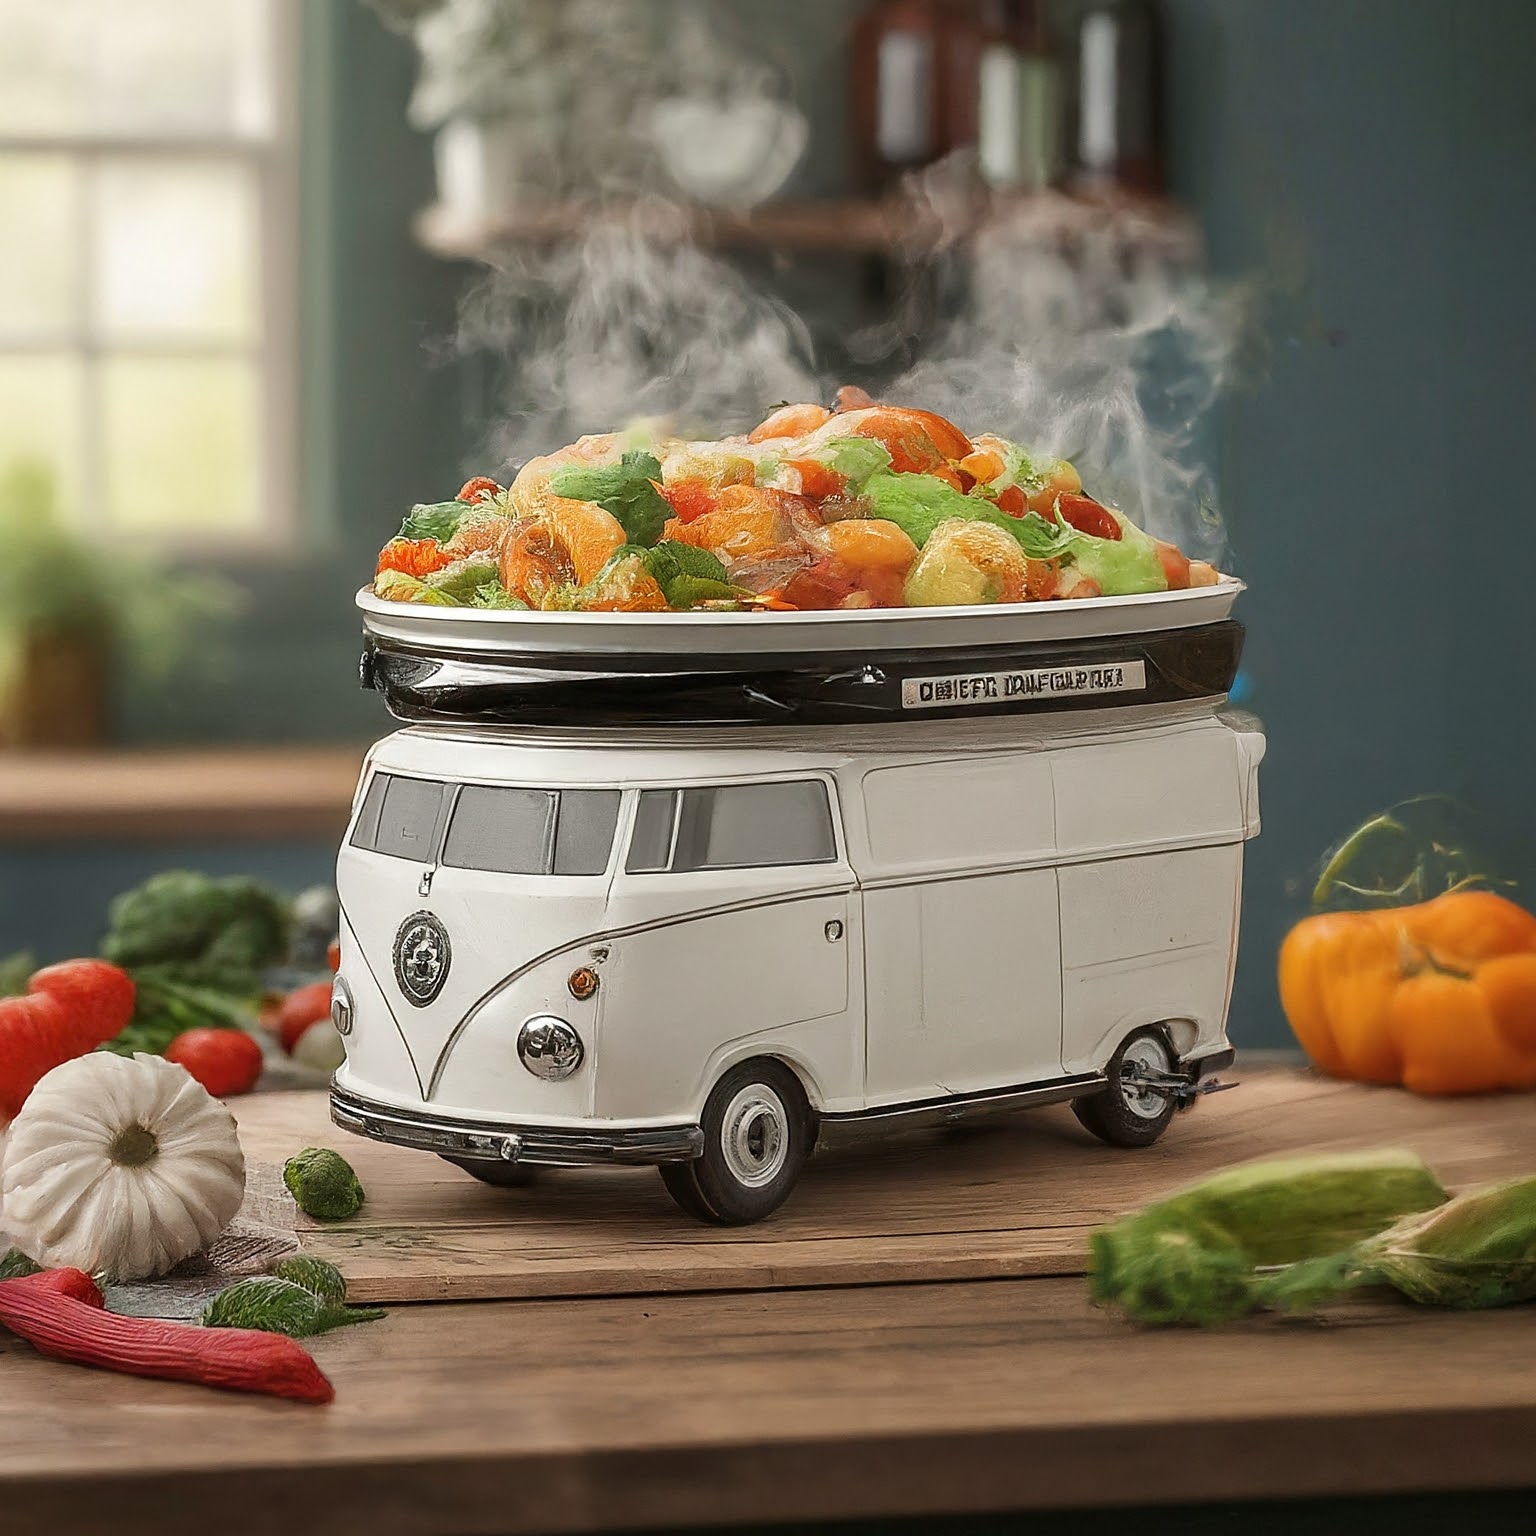 Volkswagen Bus Shaped Slow Cookers: Infusing Retro Vibes into Your Kitchen Adventure luxarts volkswagen bus slow cookers 14